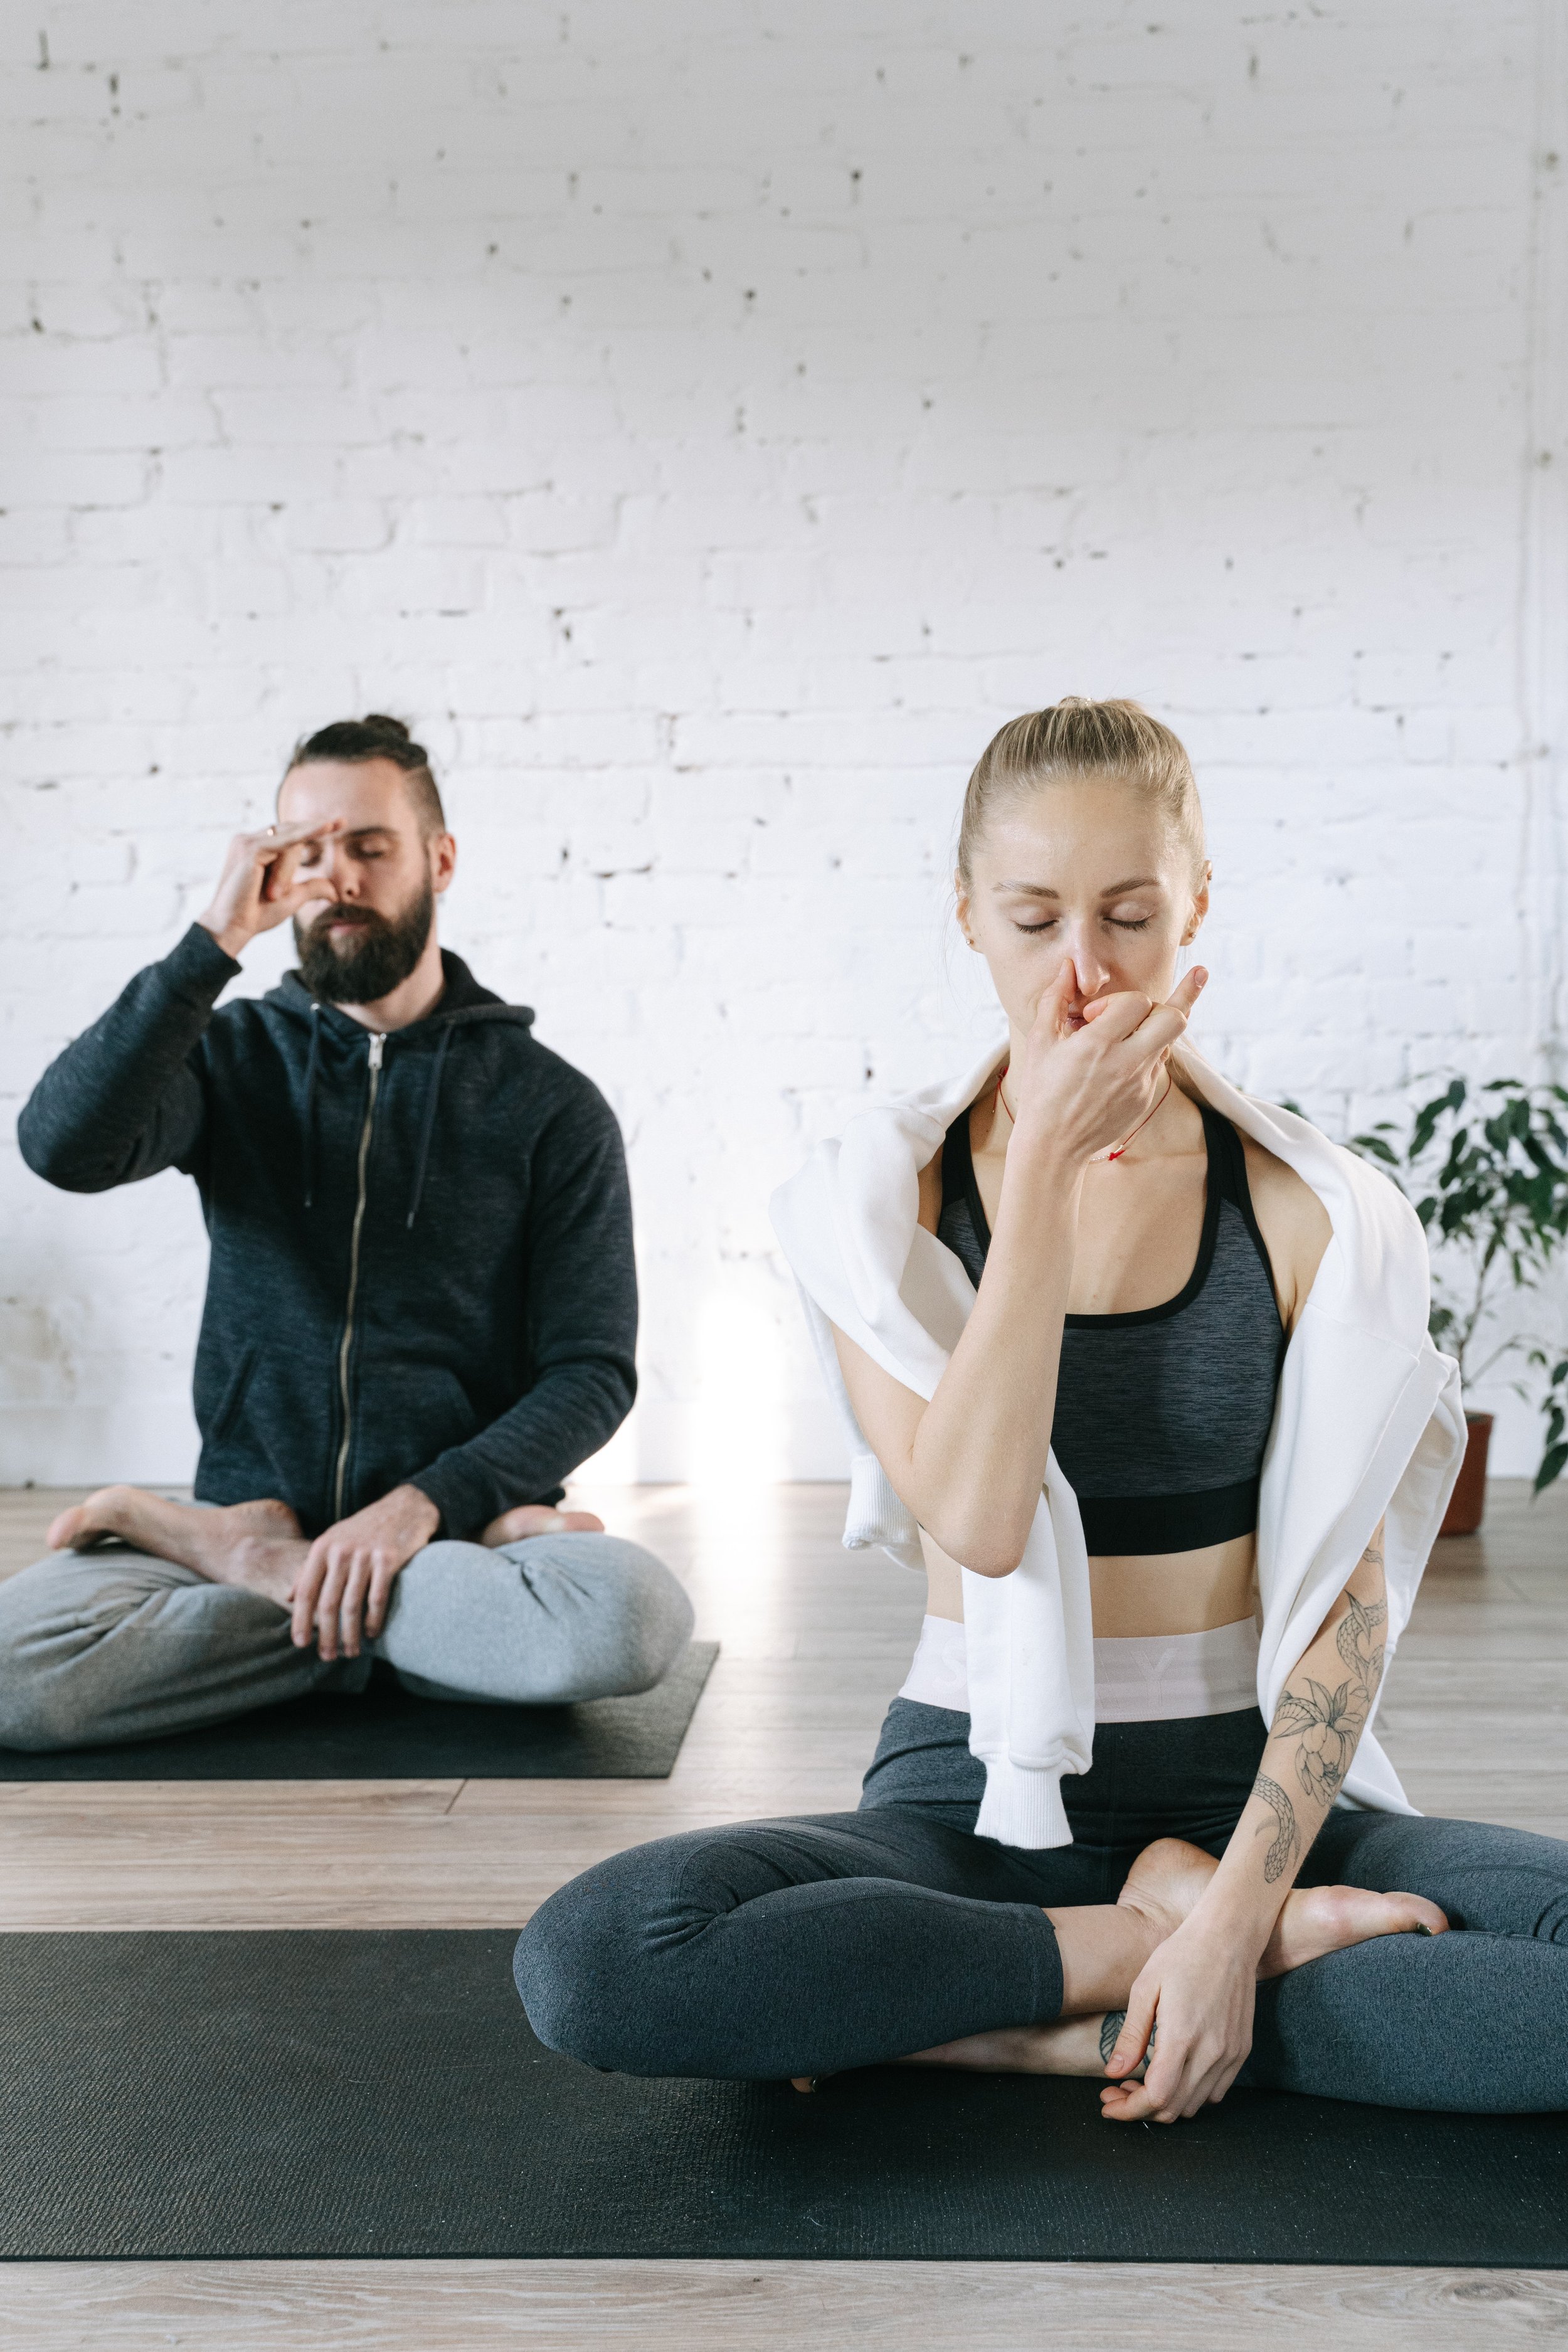 8 Hot Couple Yoga Poses for Intimacy & Connection (Beginner-Friendly!)